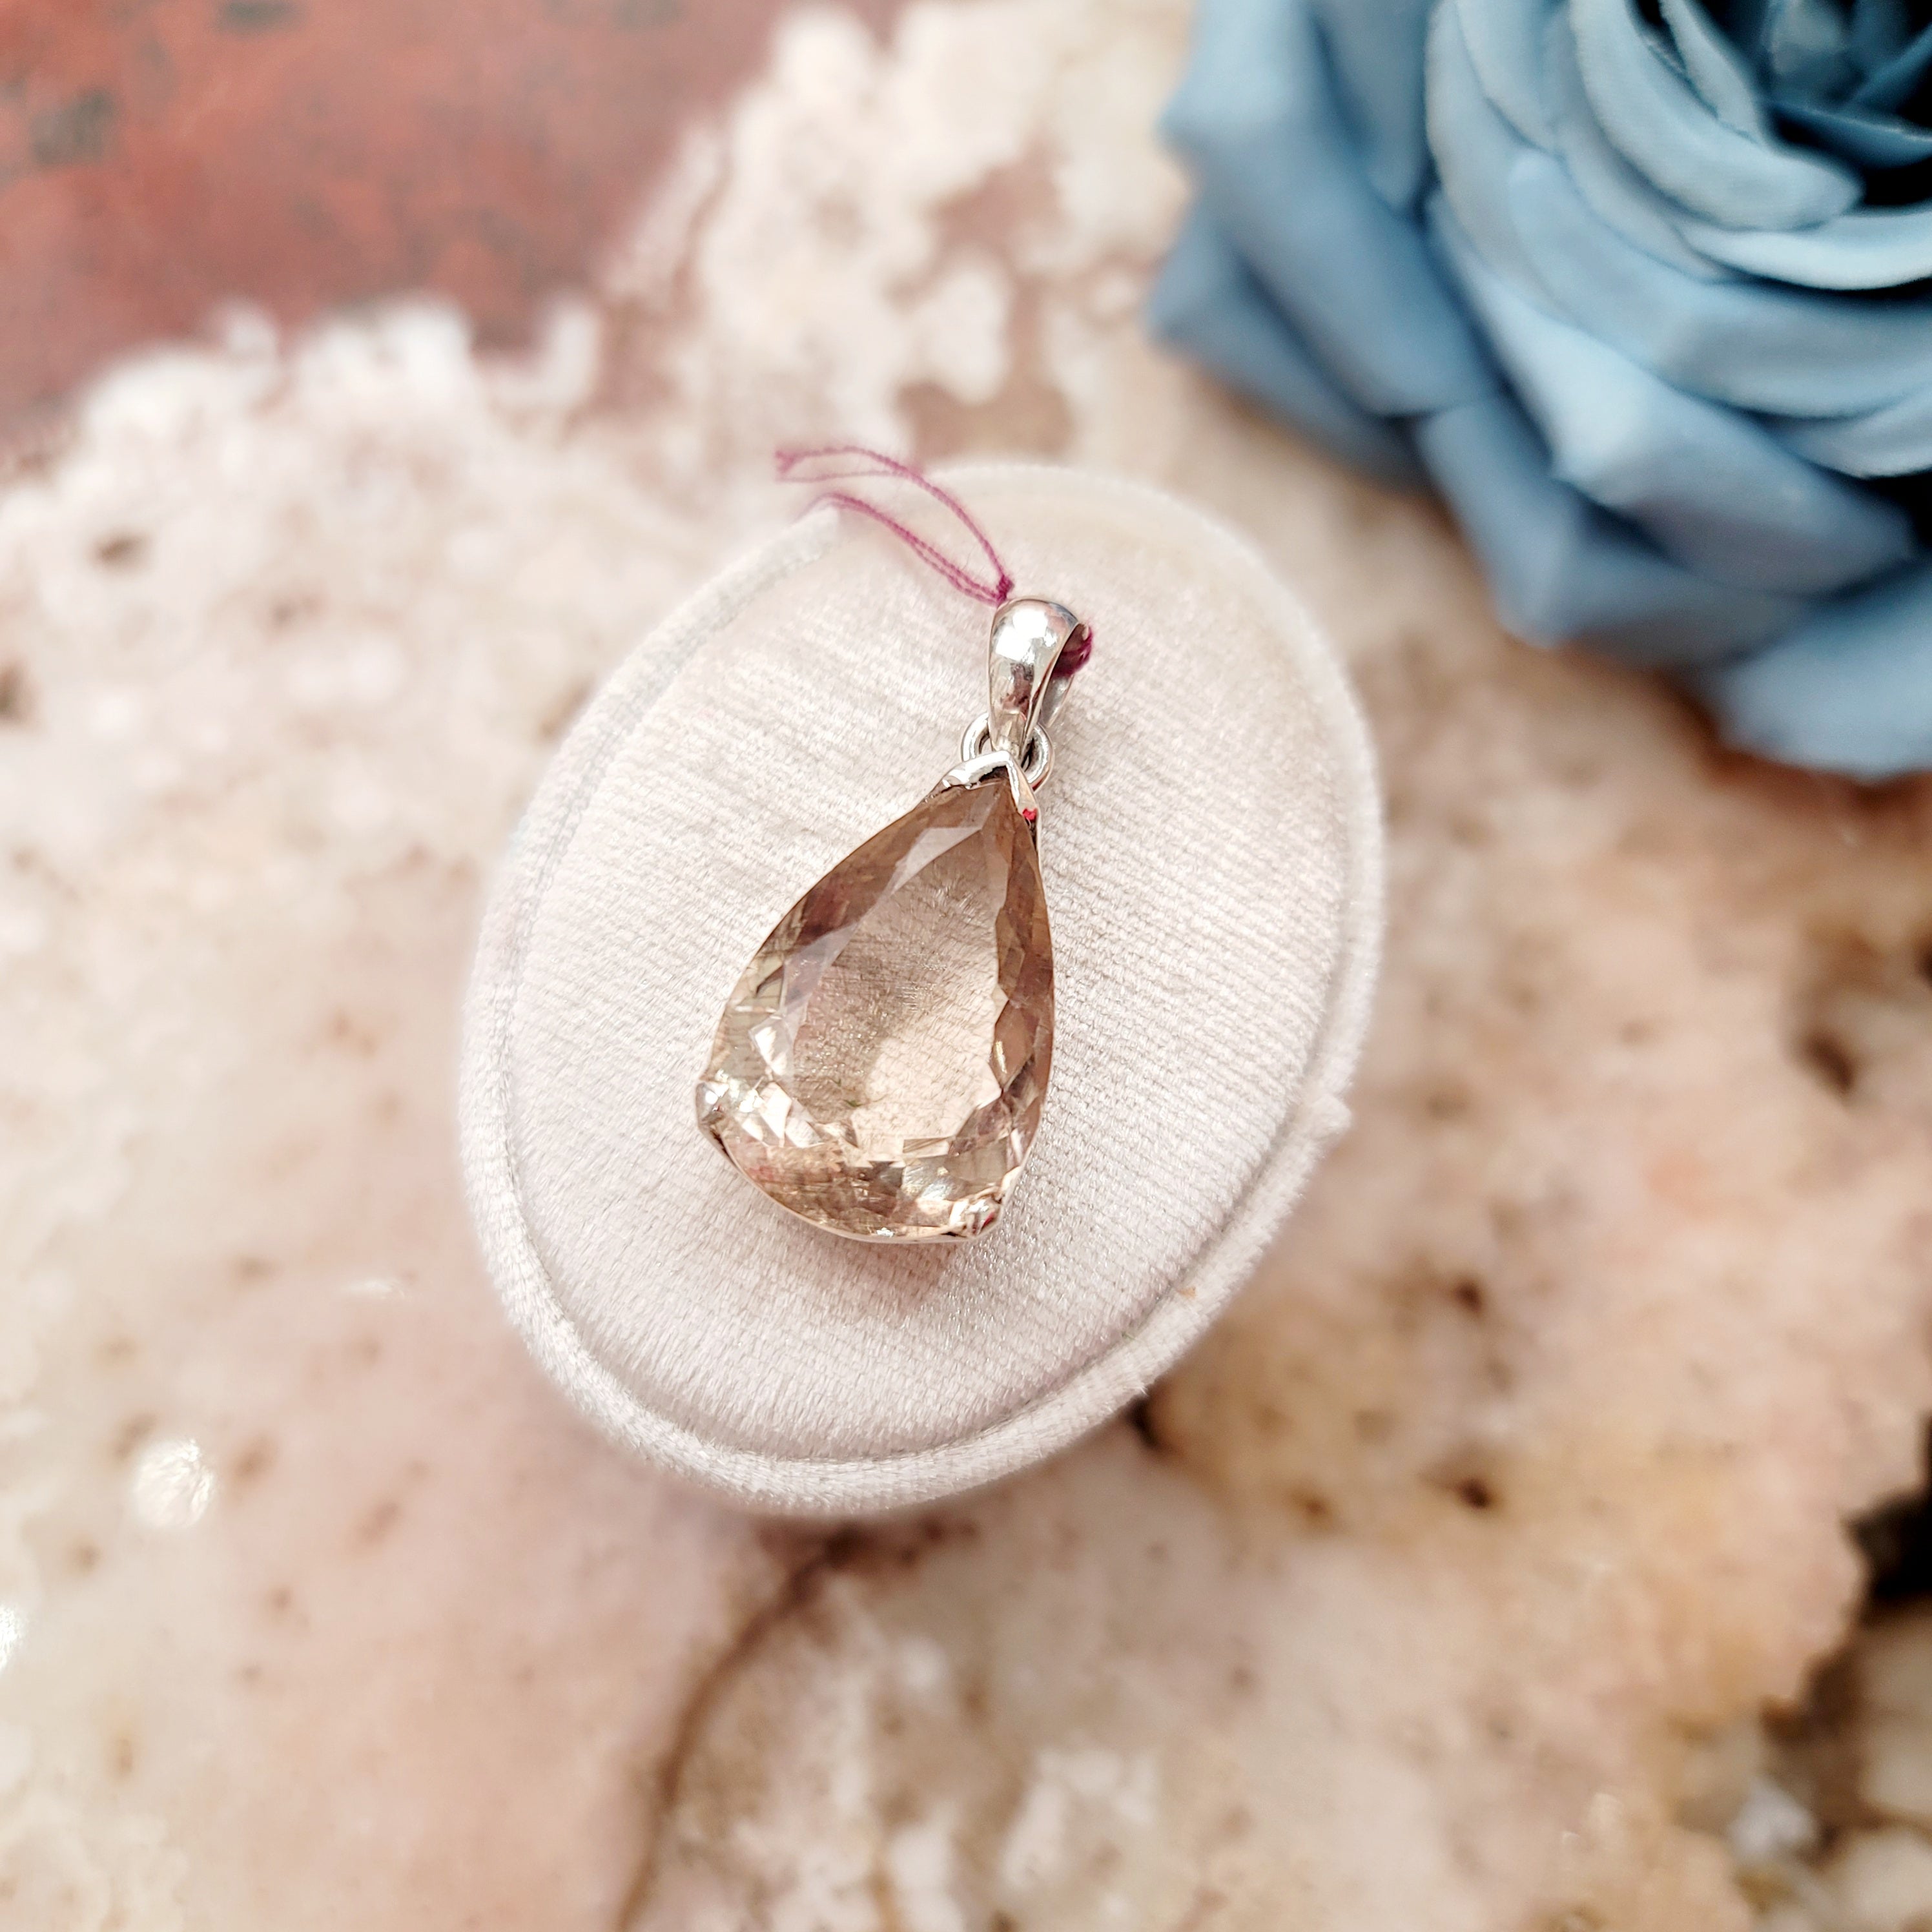 Scapolite Pendant for Manifesting and Protection